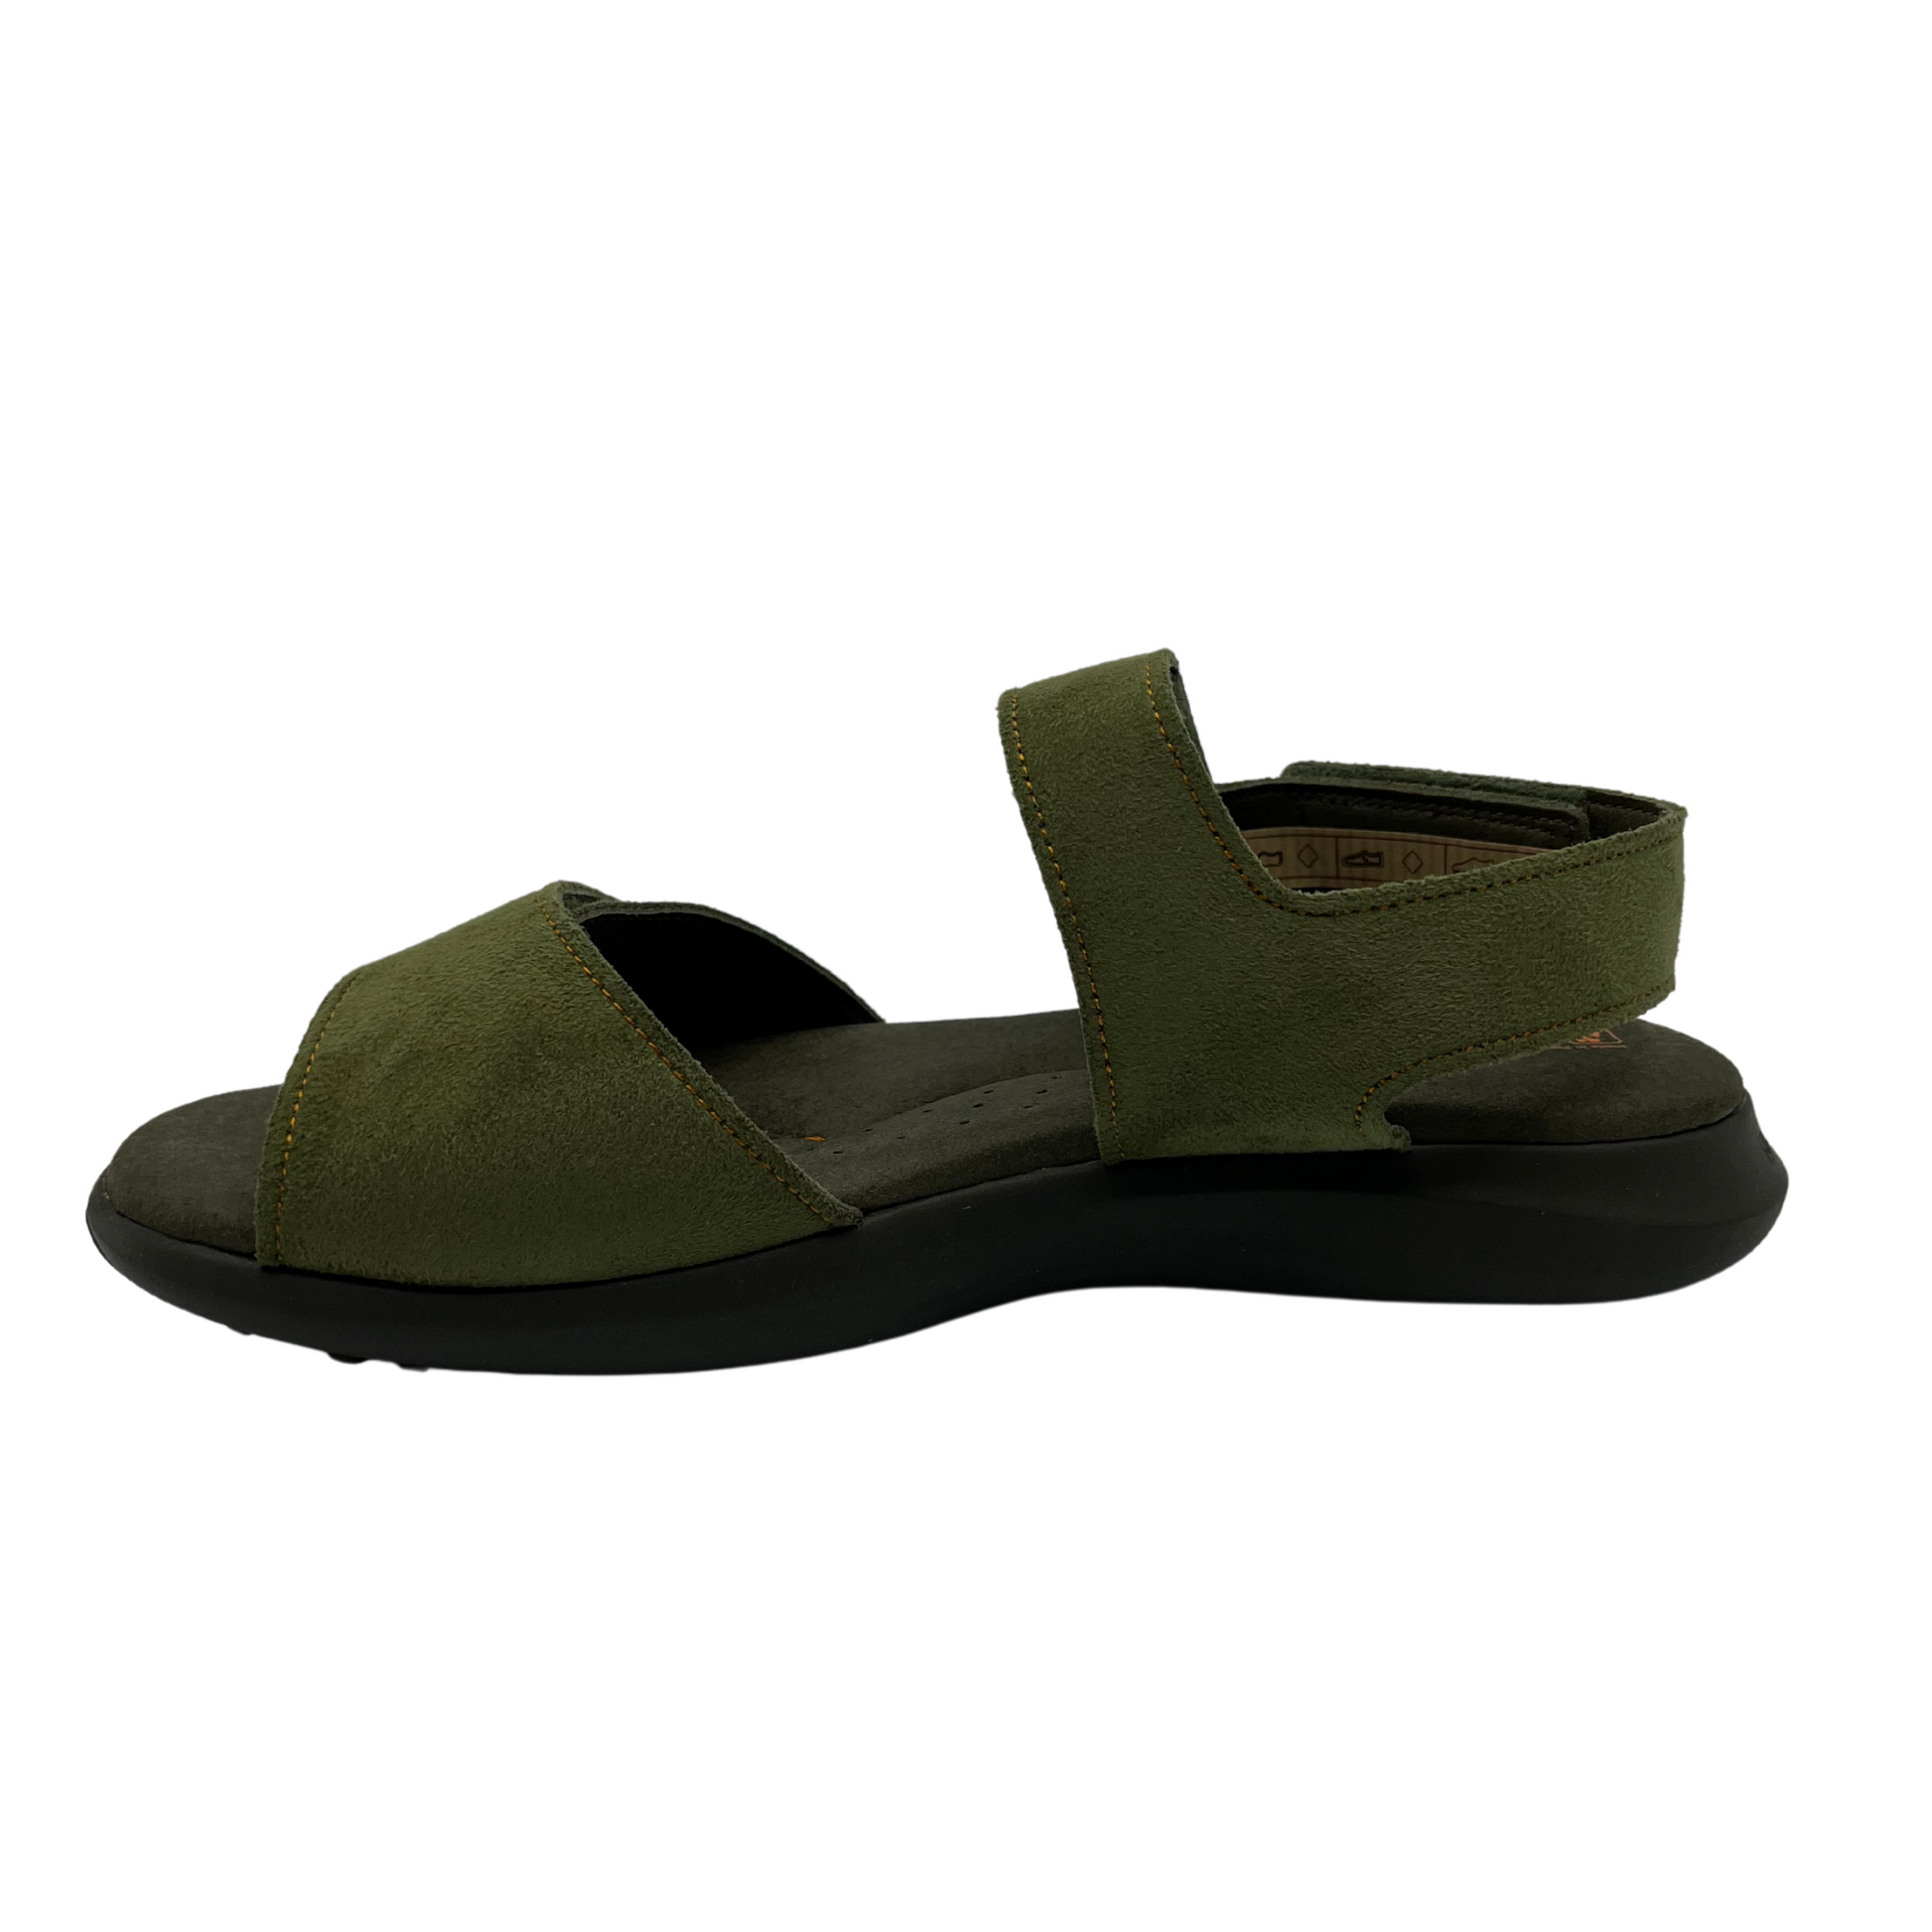 Left facing view of green leather sandals with 3 adjustable velcro straps and open toe